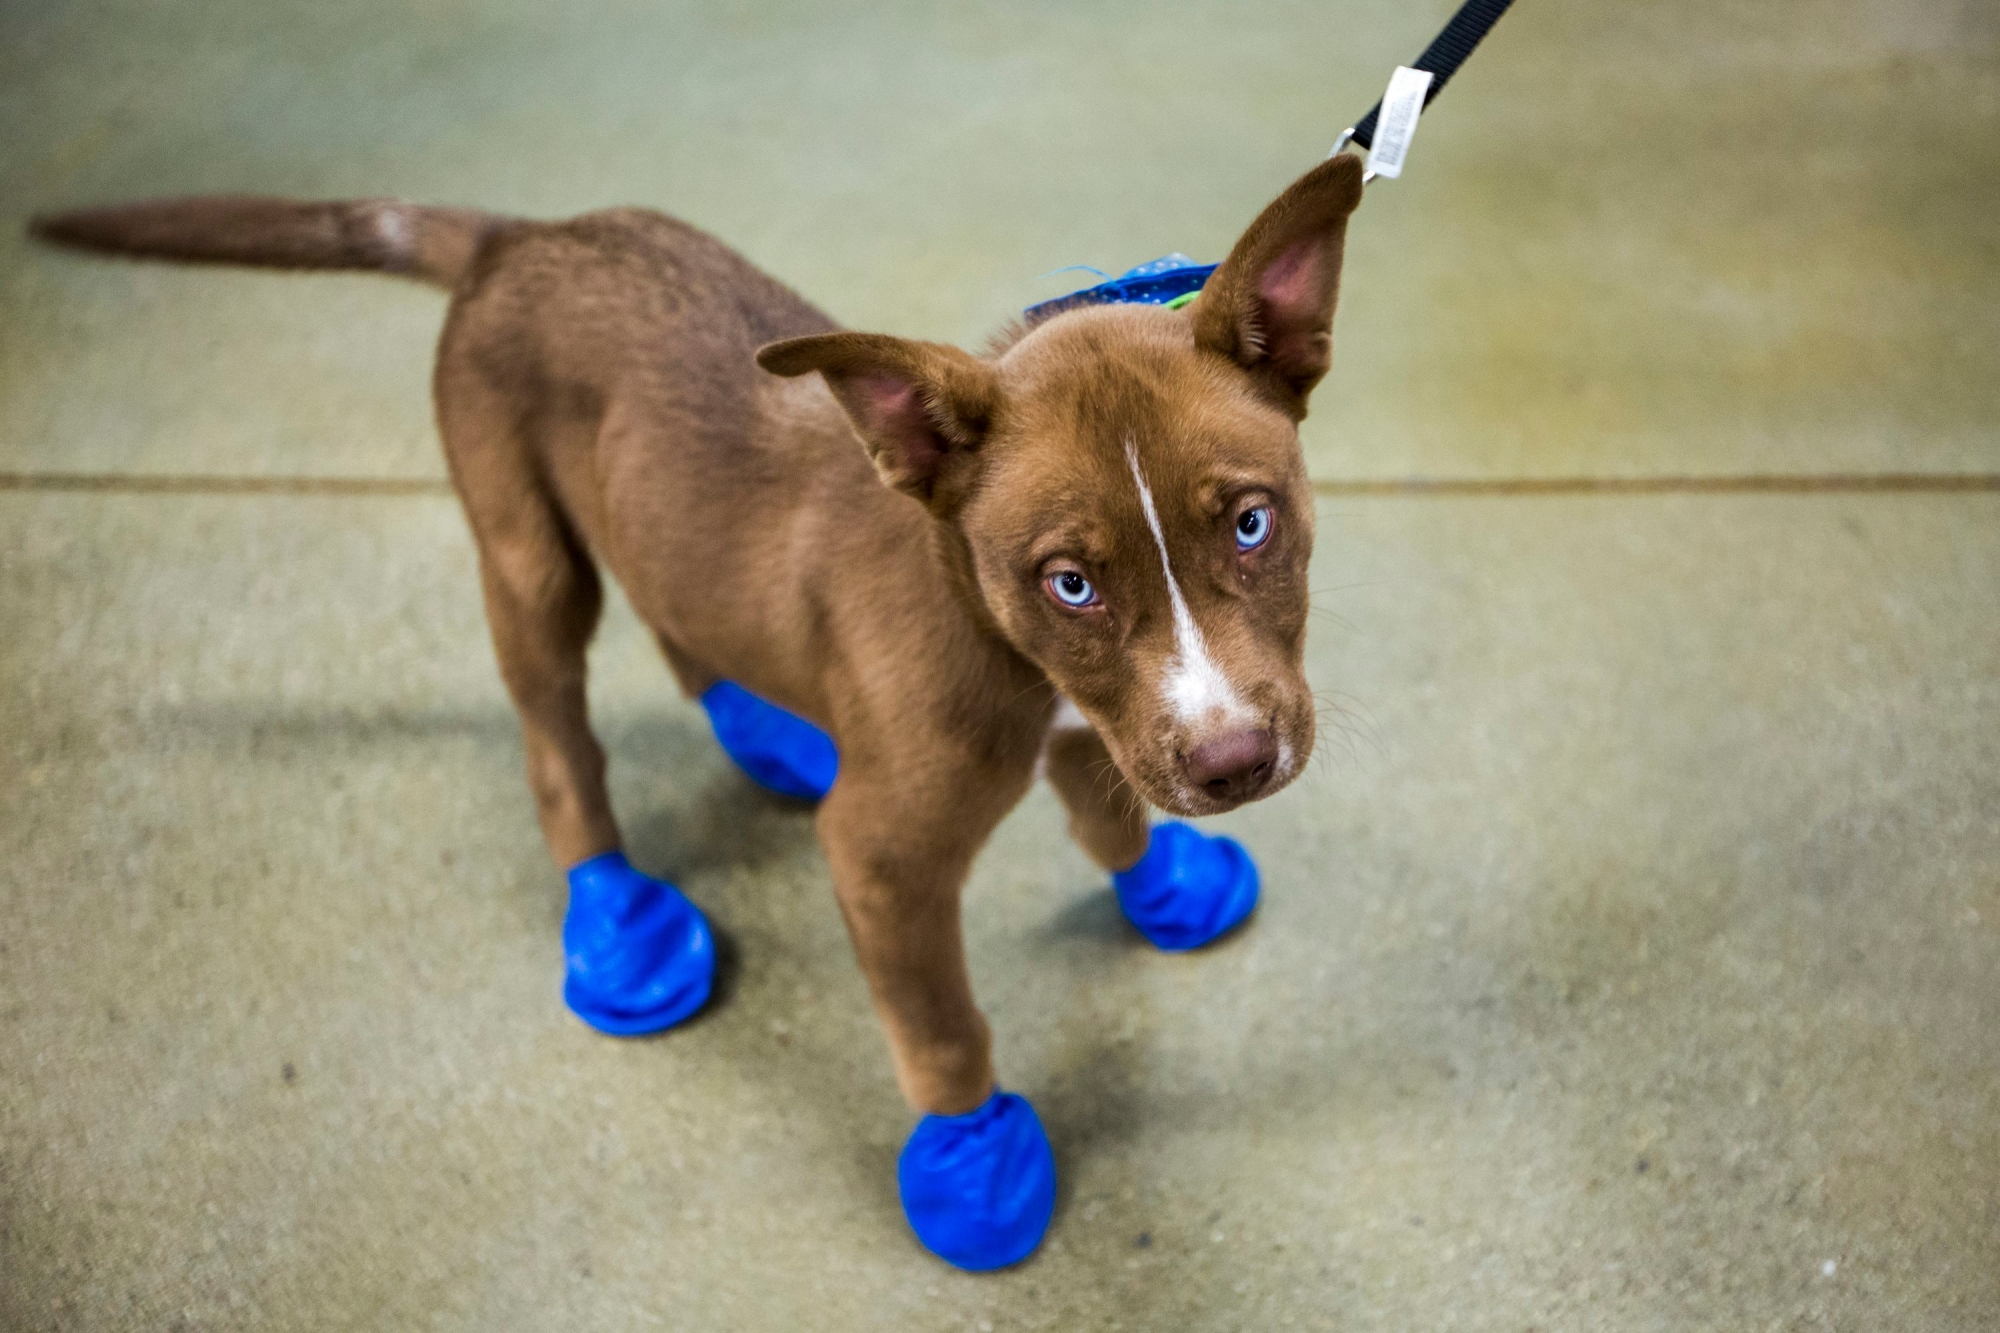 Arrow sports his new elastic booties at a PetSmart in Tempe, Ariz. on Tuesday, June 20, 2017. Phoenix radio station KSLX handed out the protective coverings to protect dogs' paws from the hot pavement, as temperatures in Phoenix are forecasted to hit 120 degrees. (AP Photo/Angie Wang) Extreme Heat Wave